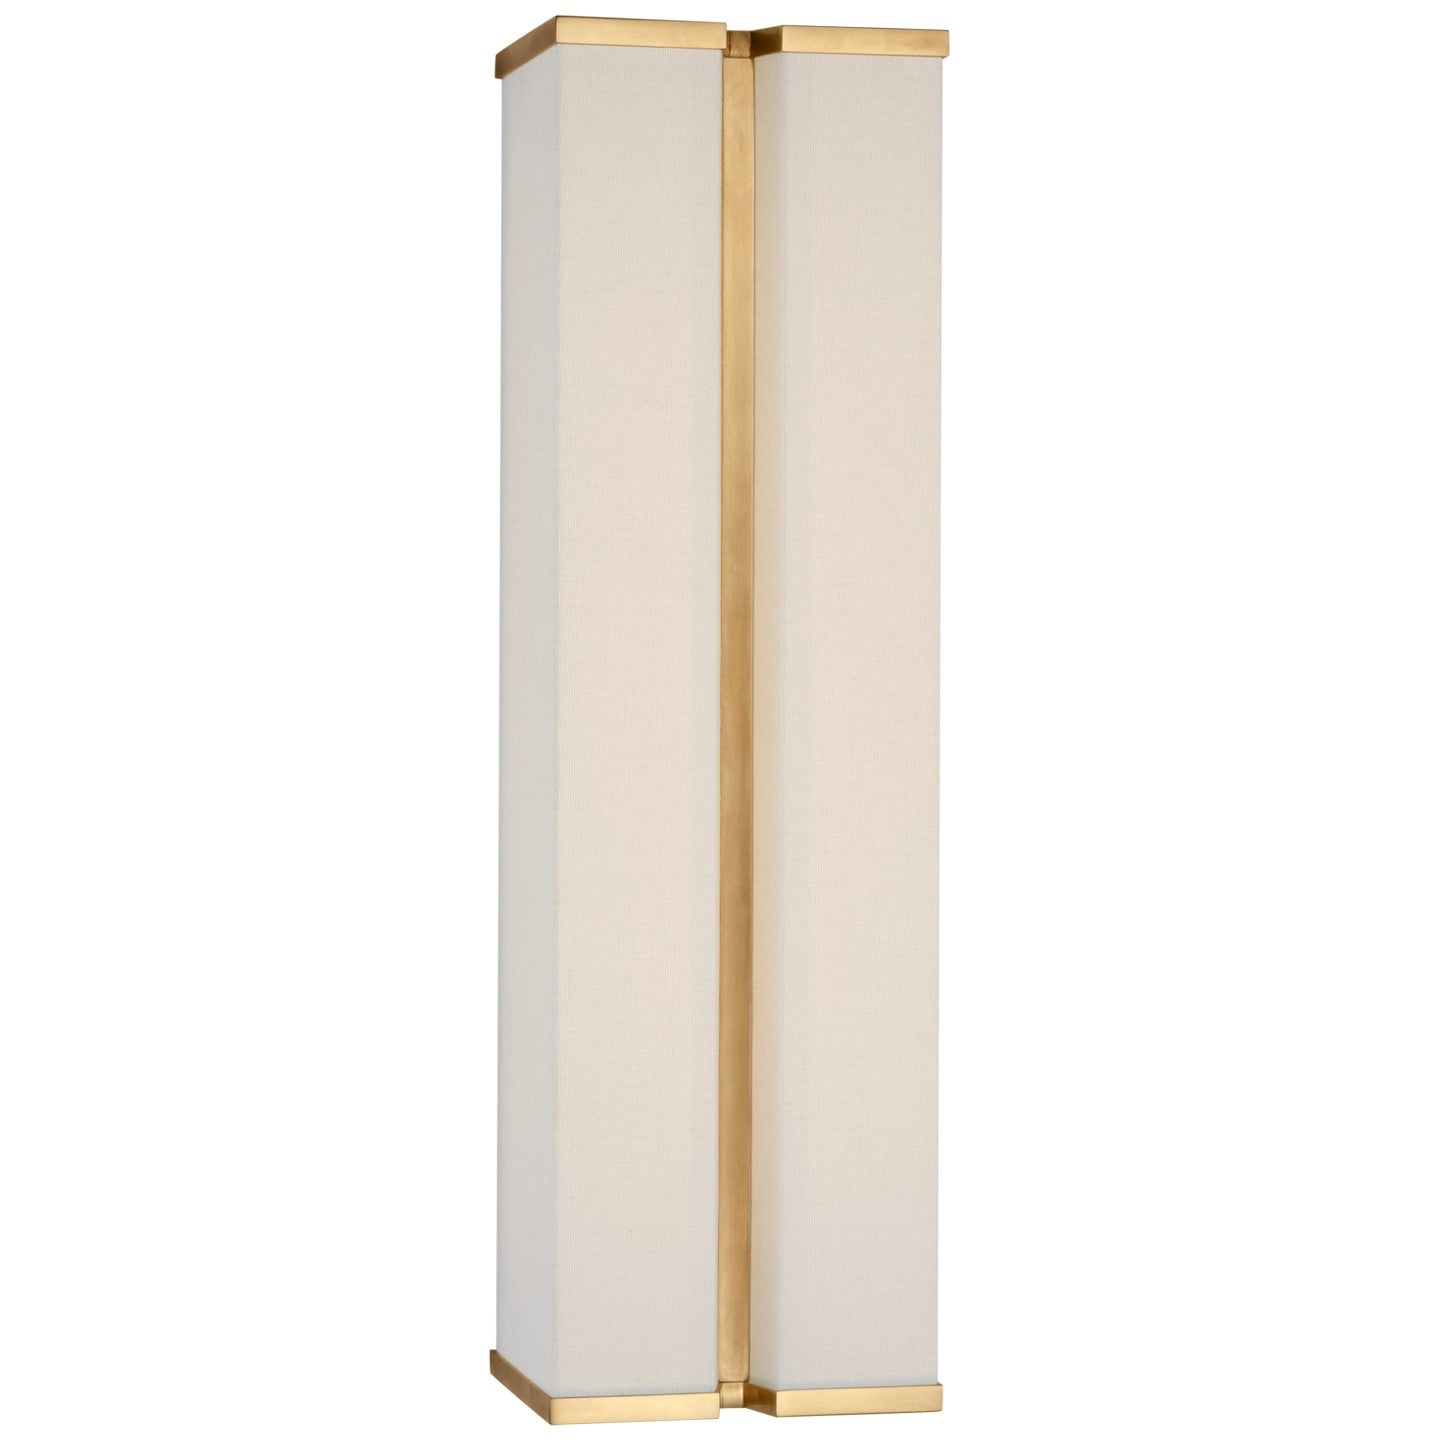 Visual Comfort Signature - PCD 2250HAB/L - LED Wall Sconce - Vernet - Hand-Rubbed Antique Brass and Linen